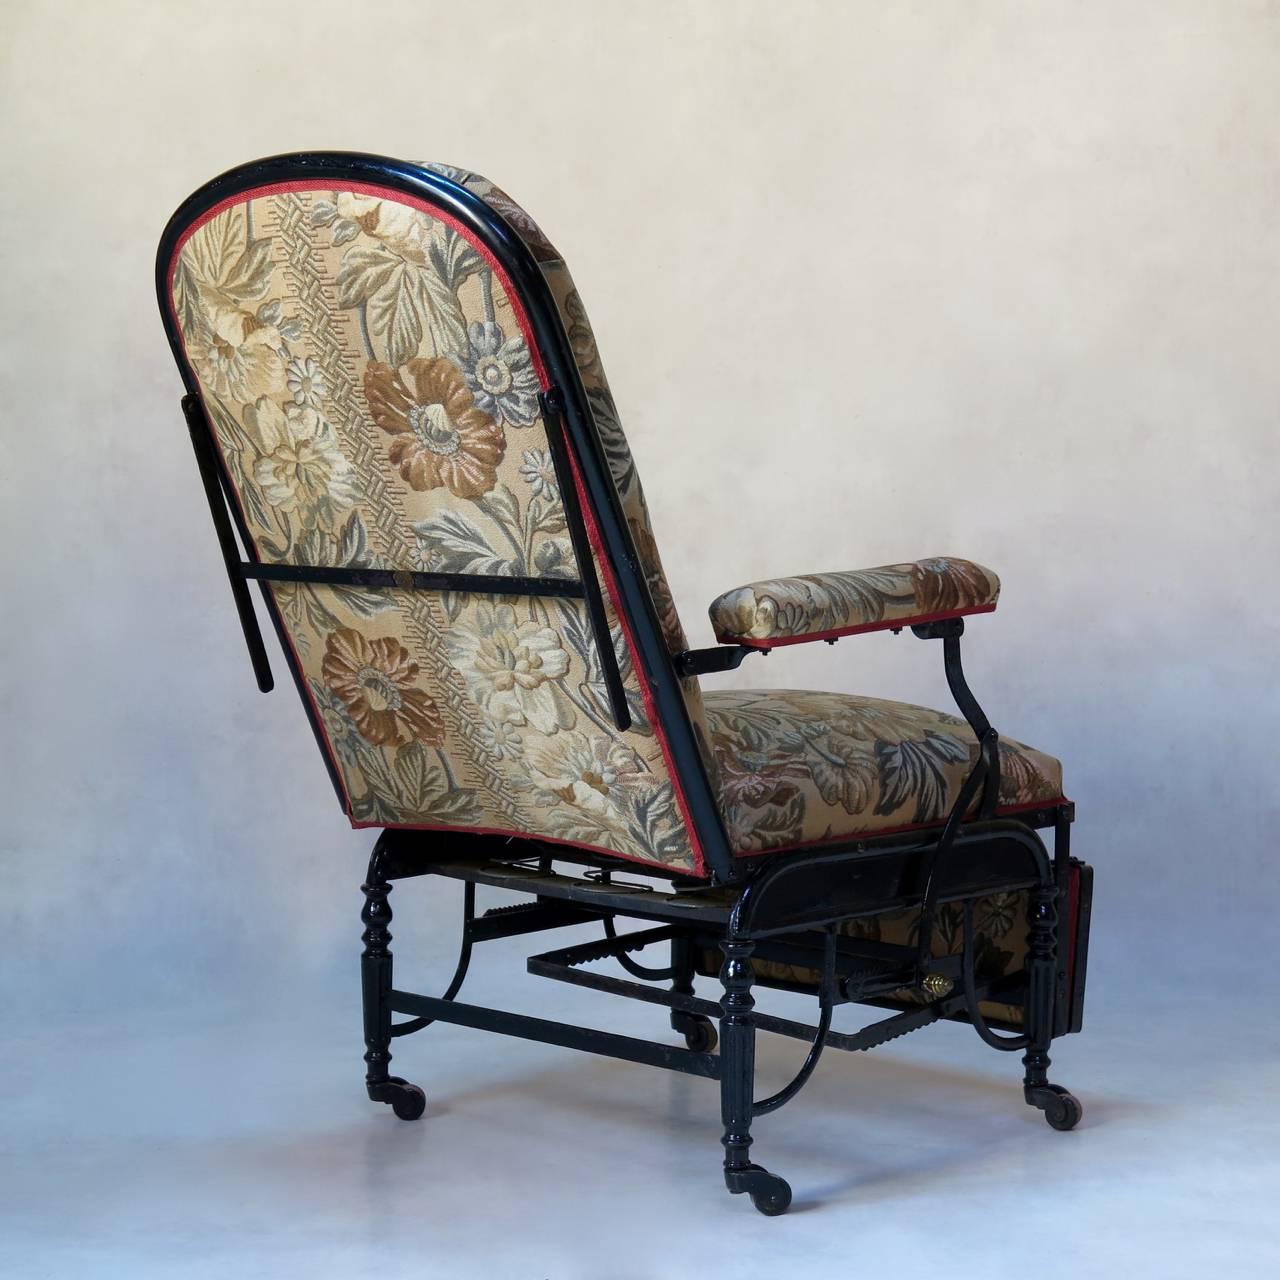 Very fine iron Campaign-style armchair with adjustable positions, from upright to horizontal. Raised on casters. Newly upholstered with vintage fabric. 

Dimensions provided below are for the chair fully folded (i.e. at its smallest).